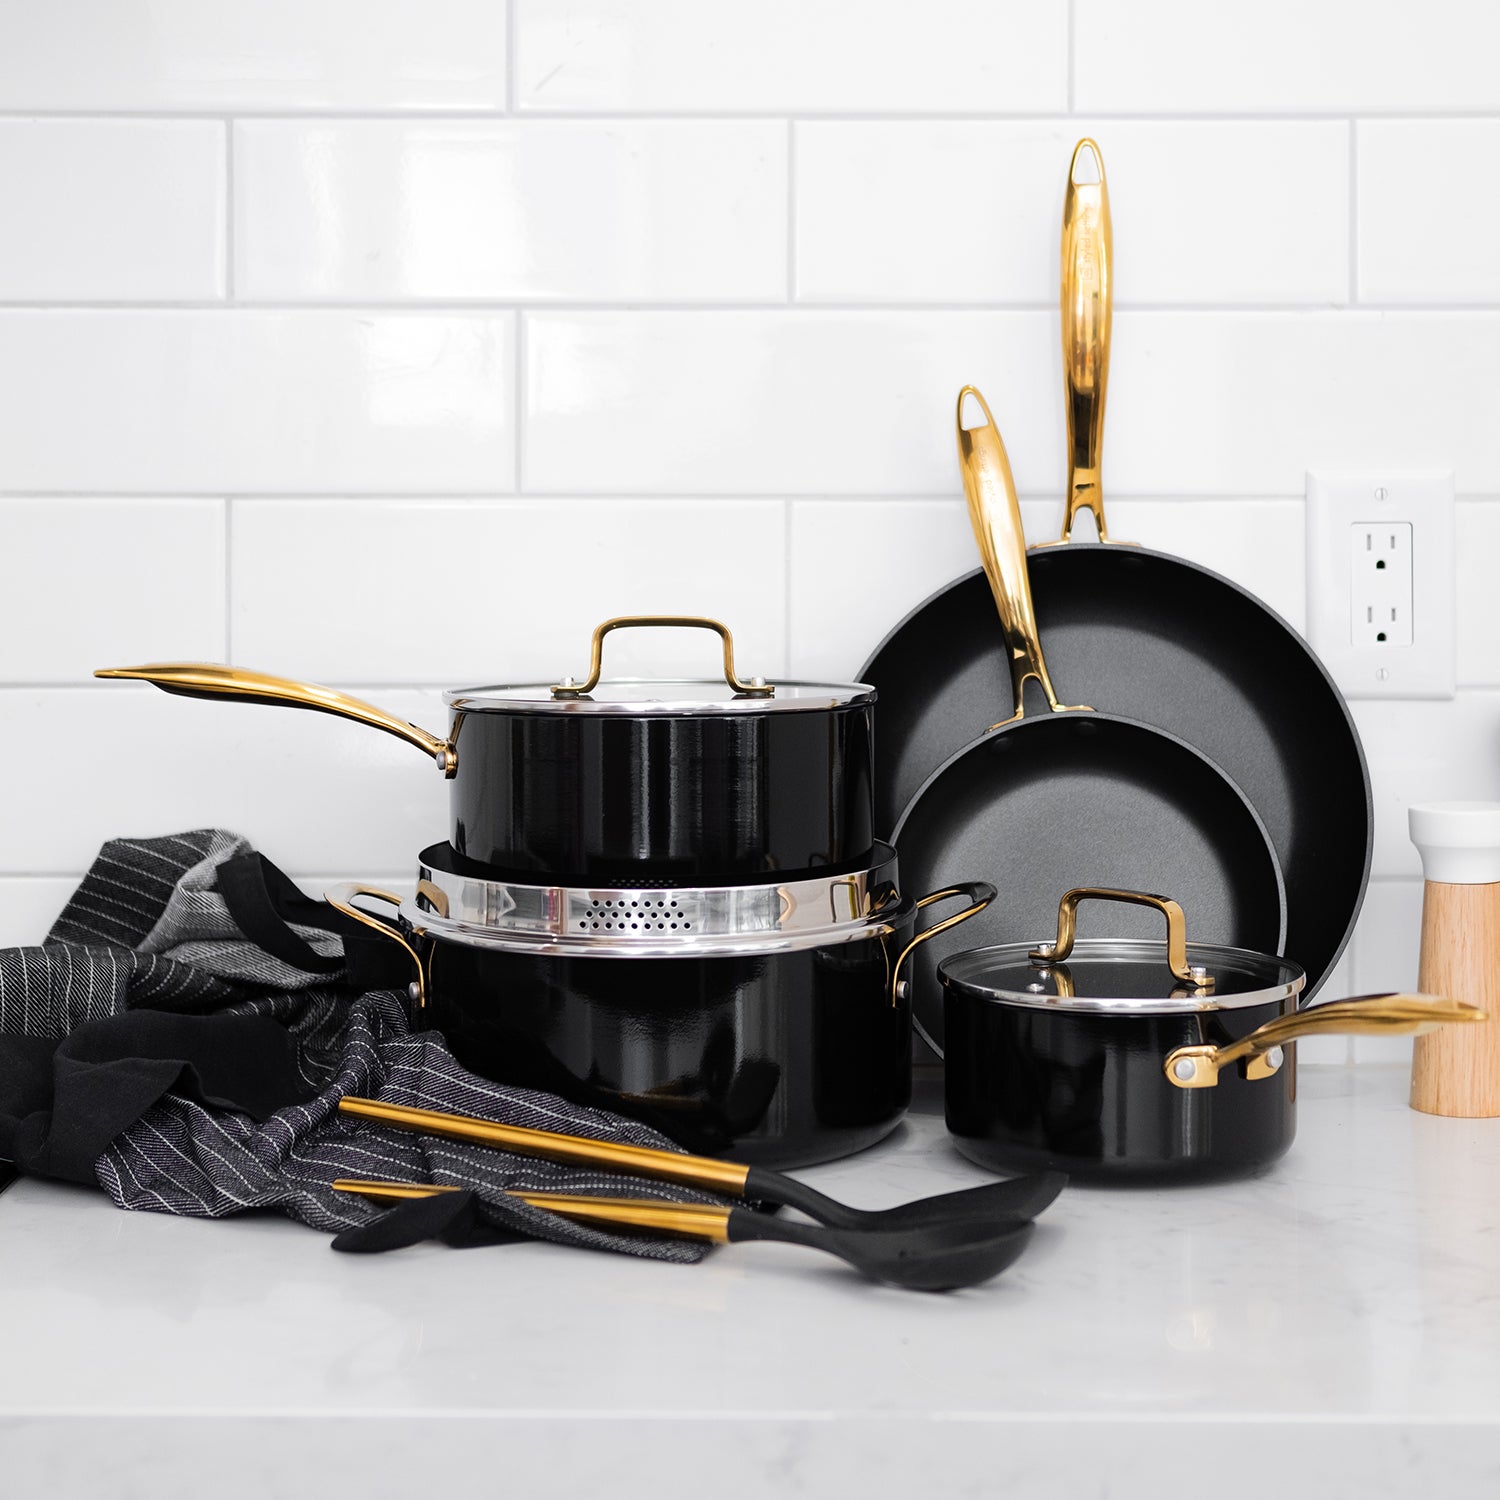 Black and Gold Nonstick Pots and Pans Set - Styled Settings